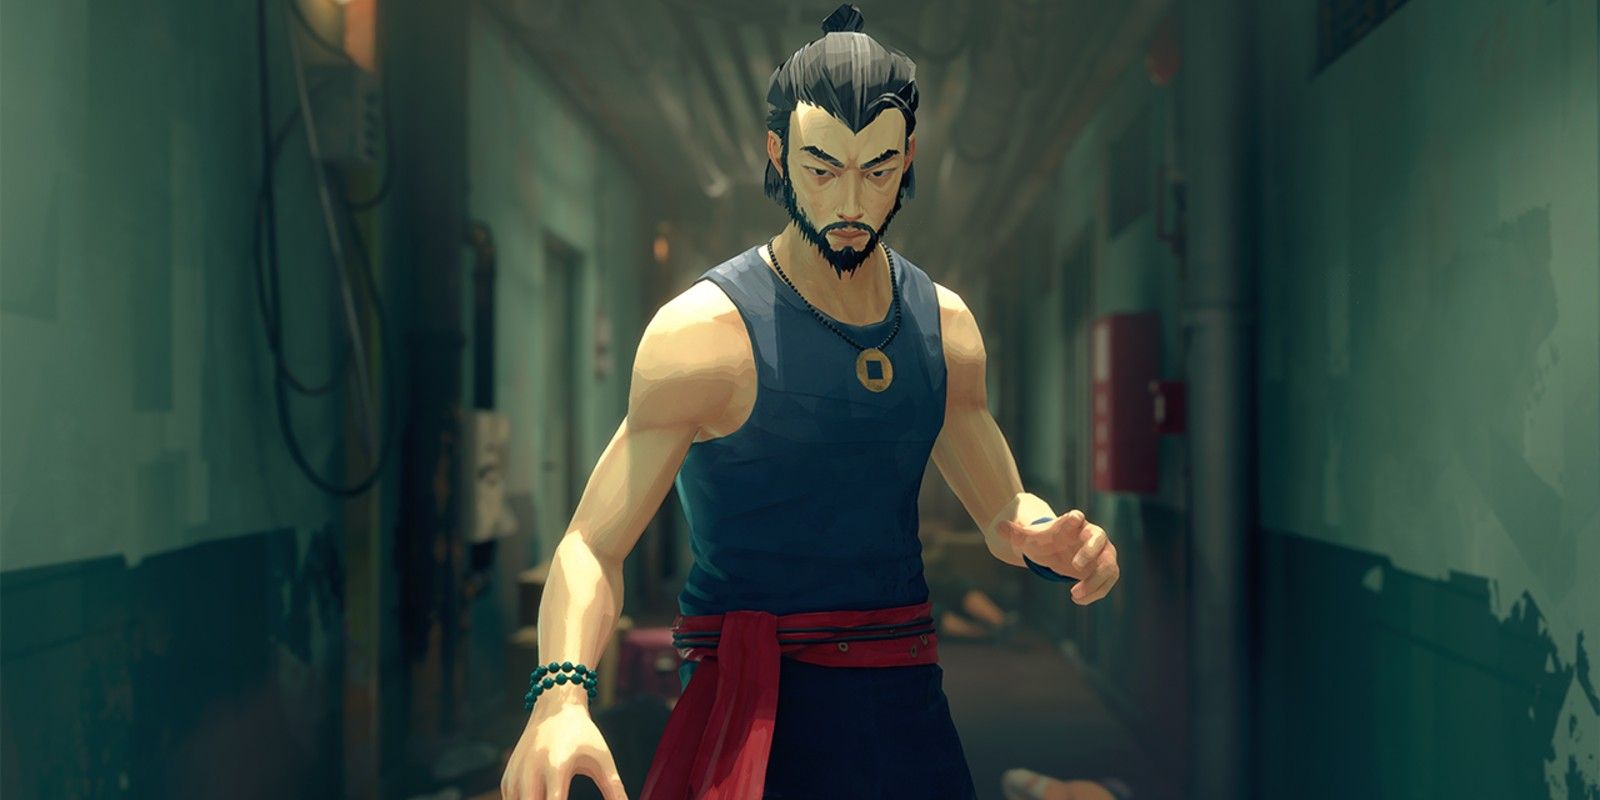 Sifu is a PS5 brawler from the Absolver team